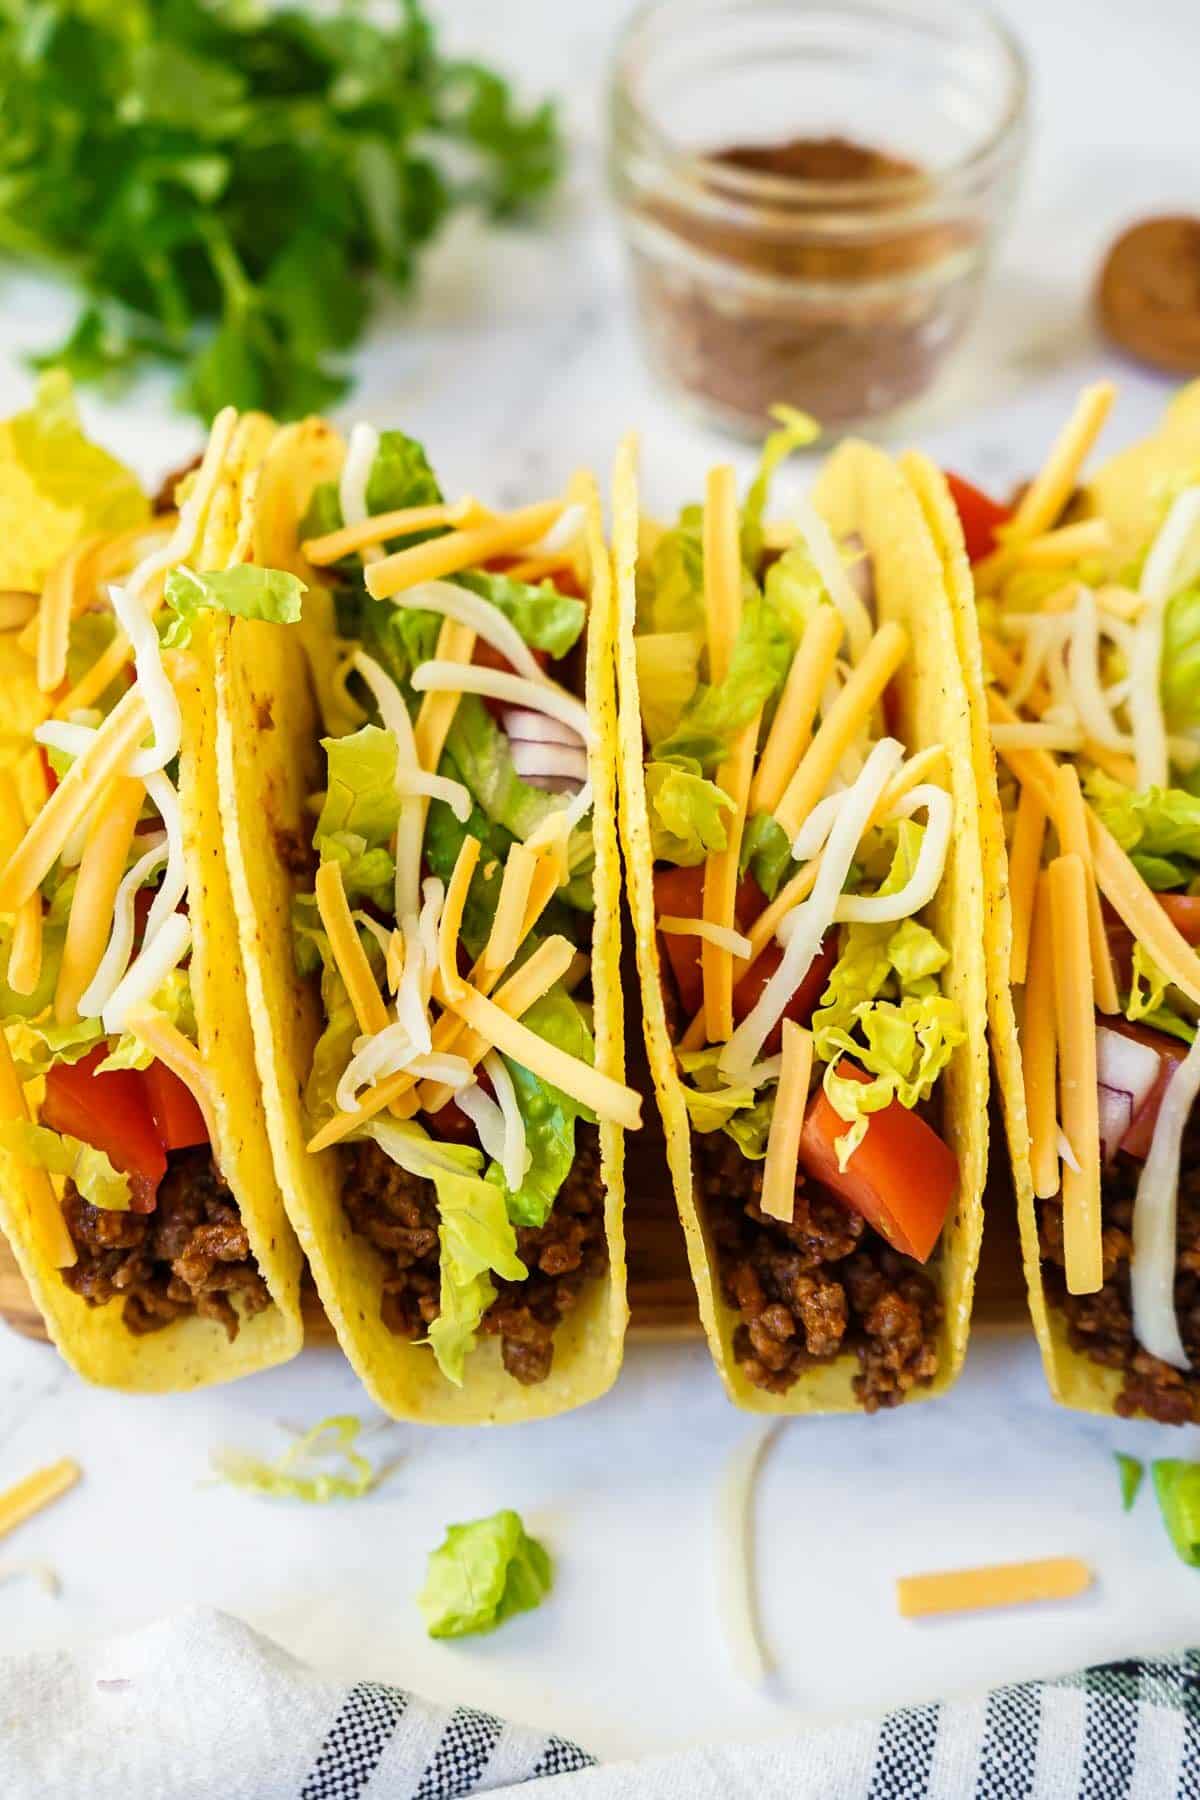 Hard shell ground beef tacos lined up on a plate.